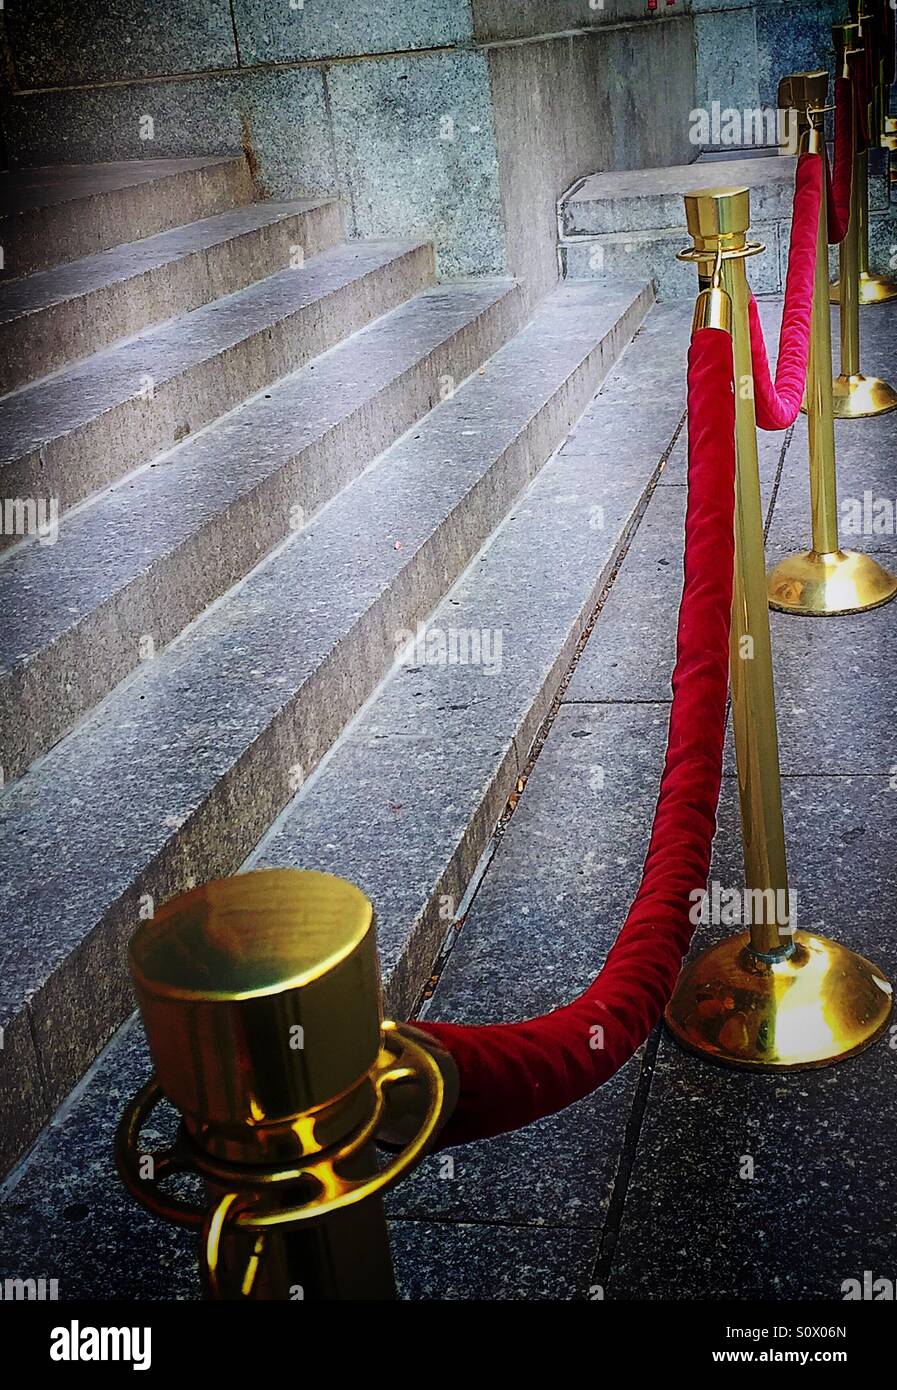 Velvet red ropes and stanchions keep an event exclusive Stock Photo